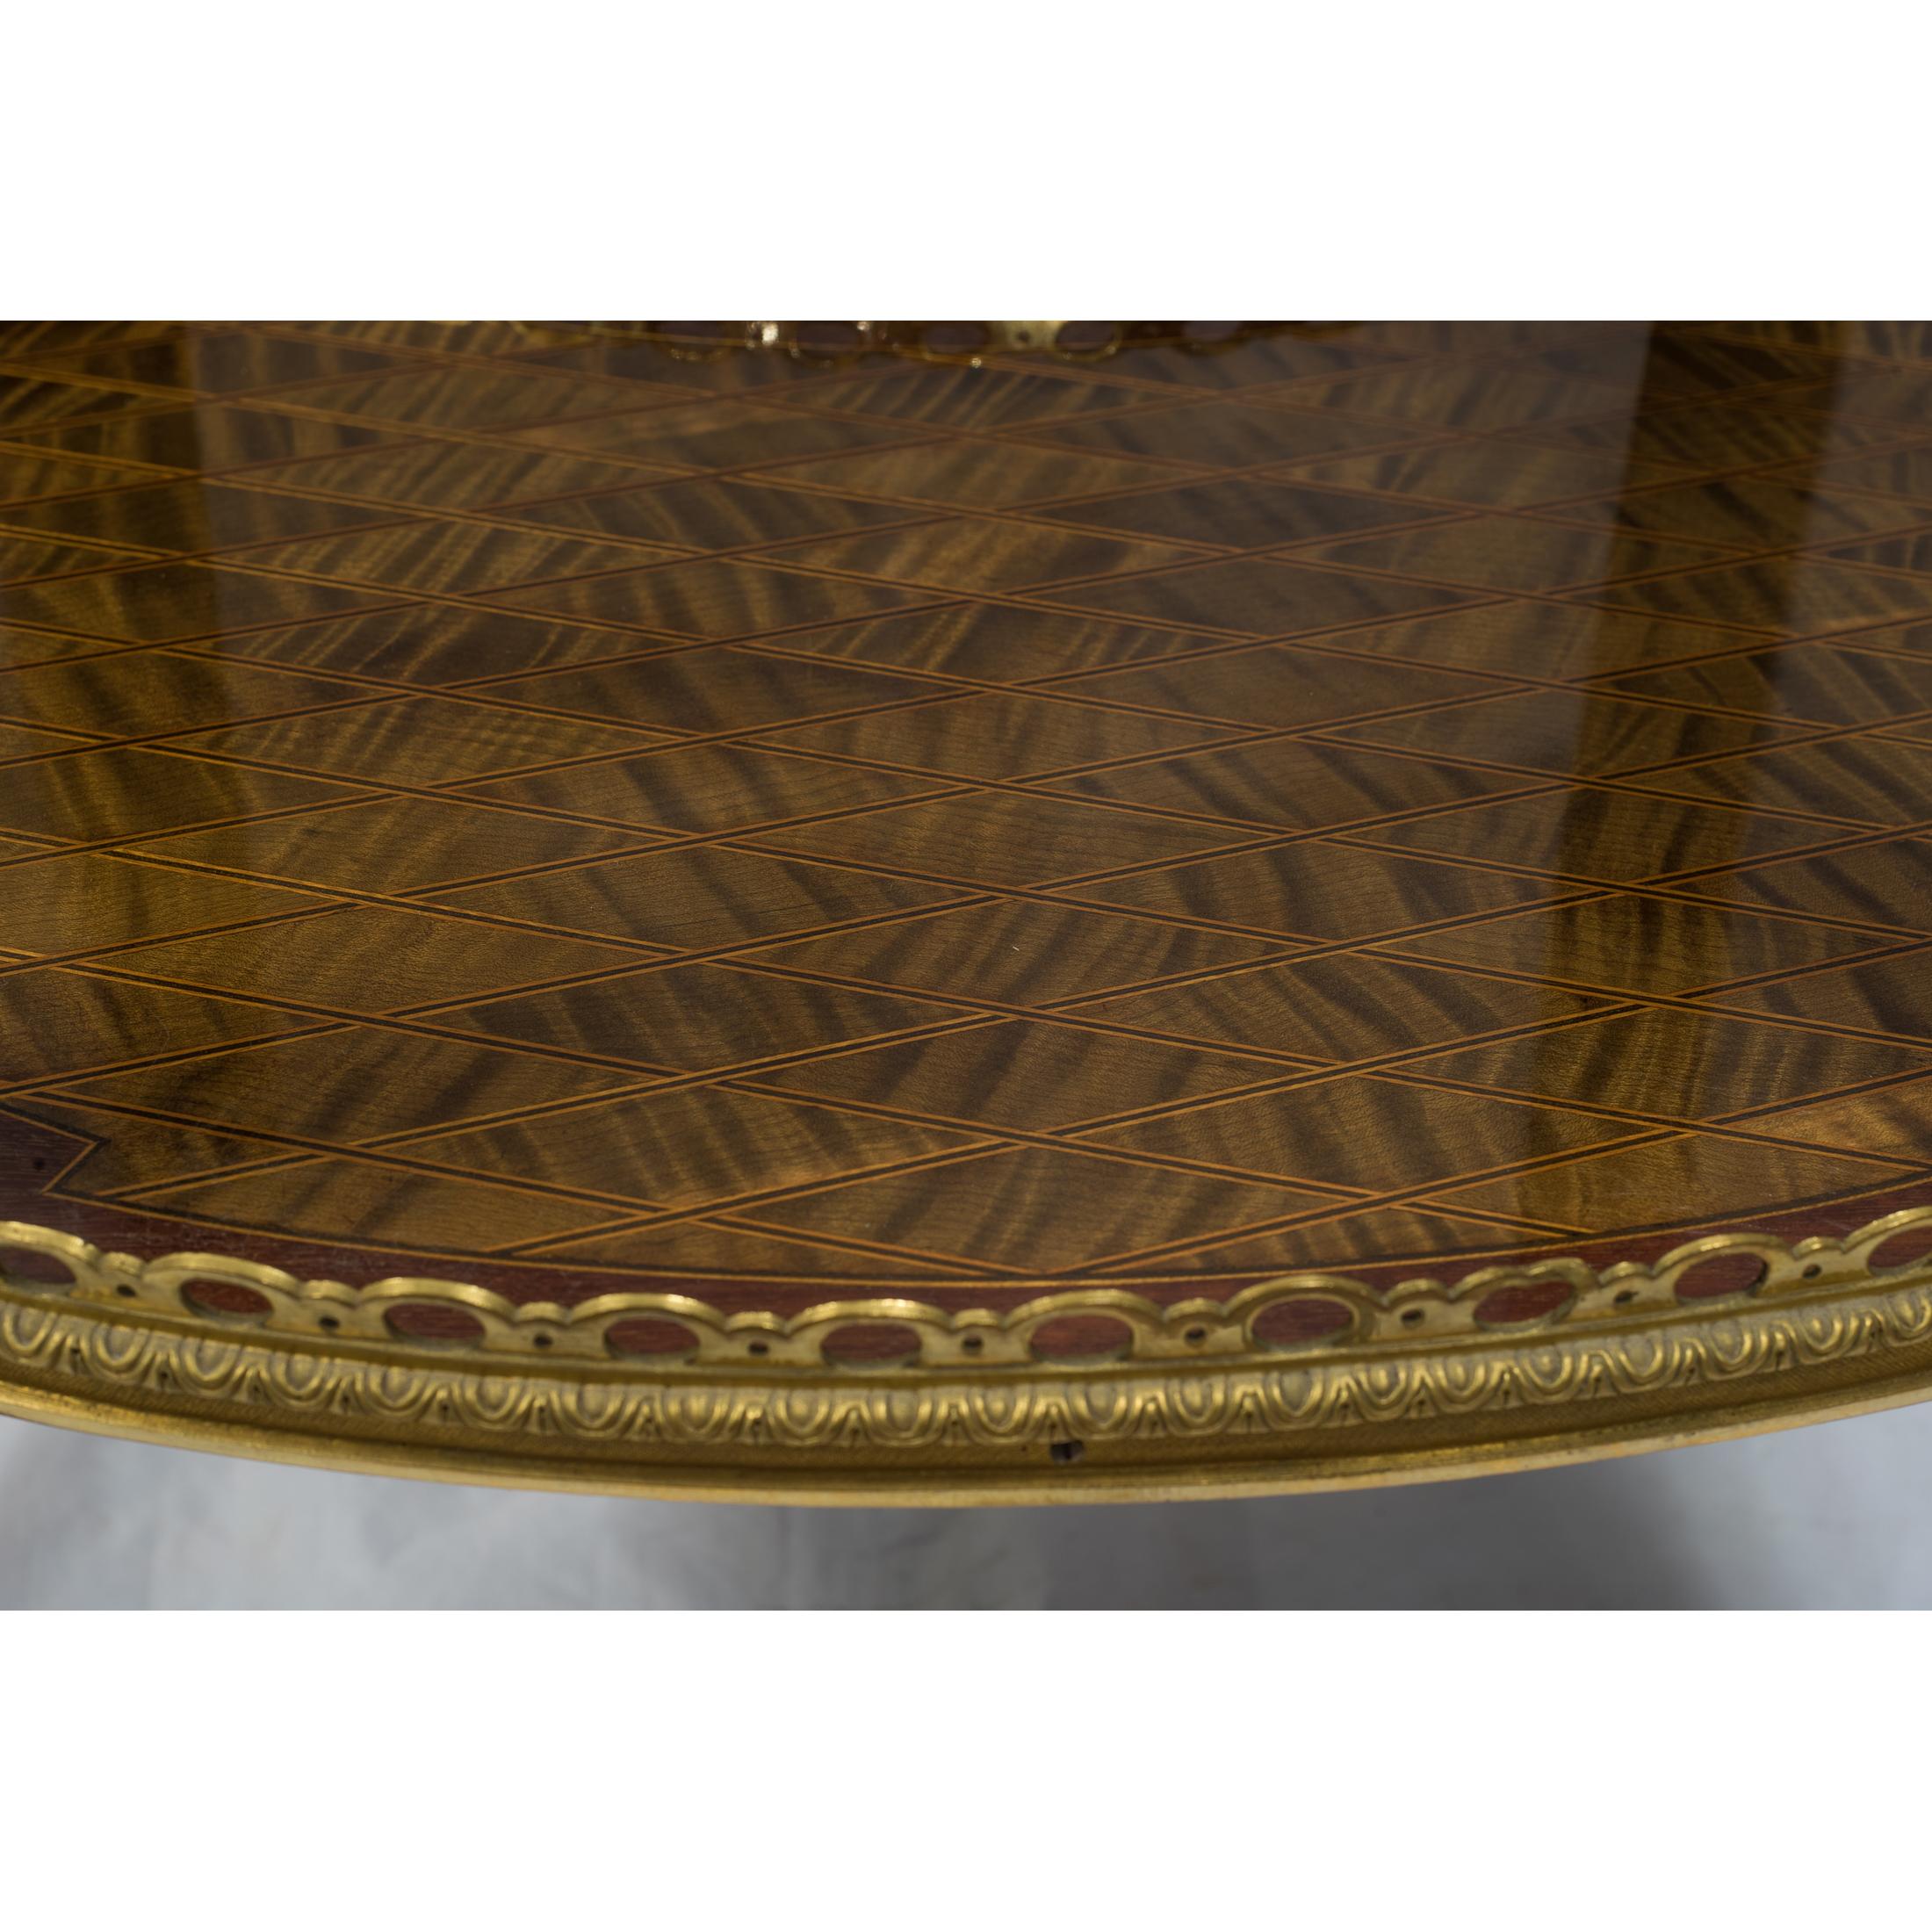 19th Century Louis XV-Style Ormolu-Mounted Inlaid Tulipwood and Mahogany Galleried Oval Table For Sale